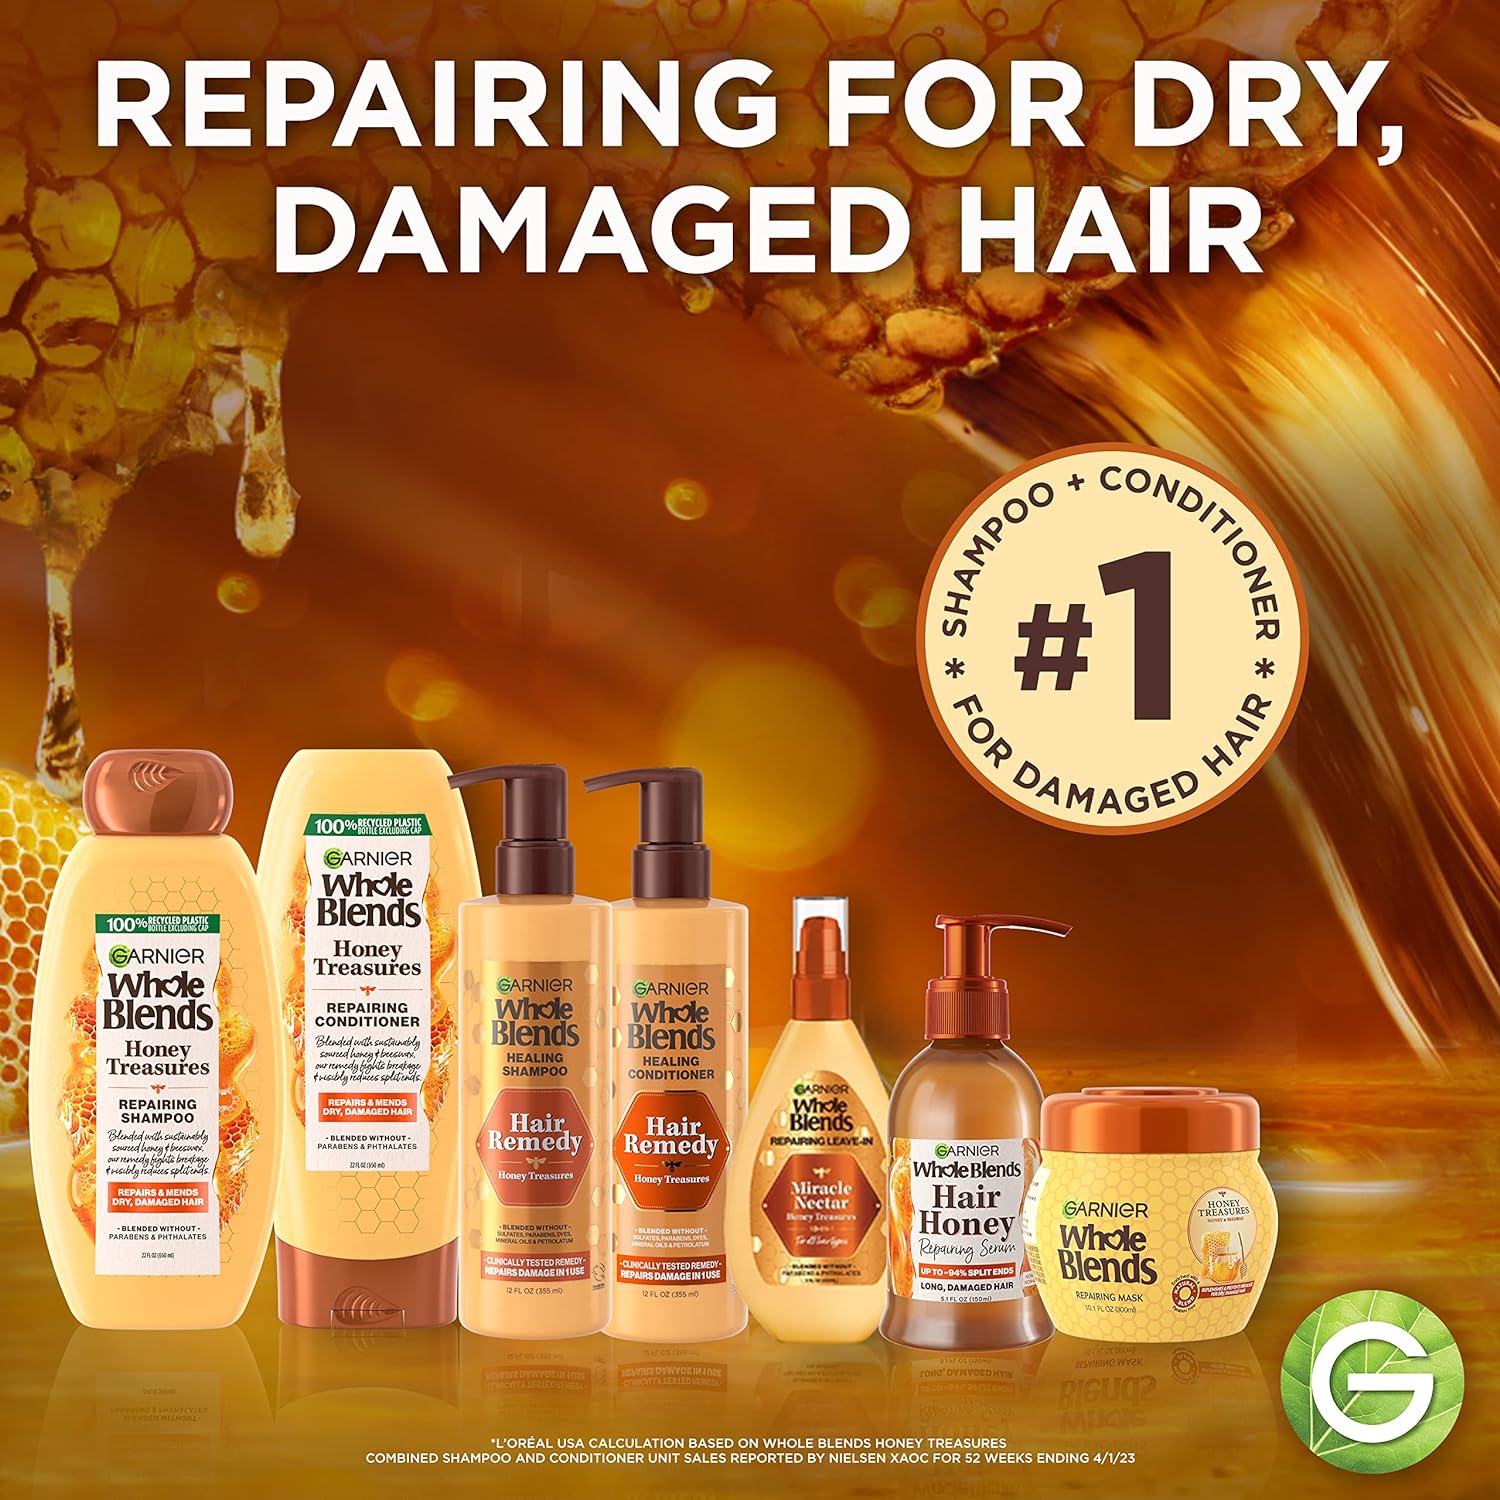 Garnier Whole Blends Honey Treasures Repairing Shampoo and Conditioner Set for Dry, Damaged Hair, 22 Fl Oz (2 Items), 1 Kit (Packaging May Vary) : Beauty & Personal Care